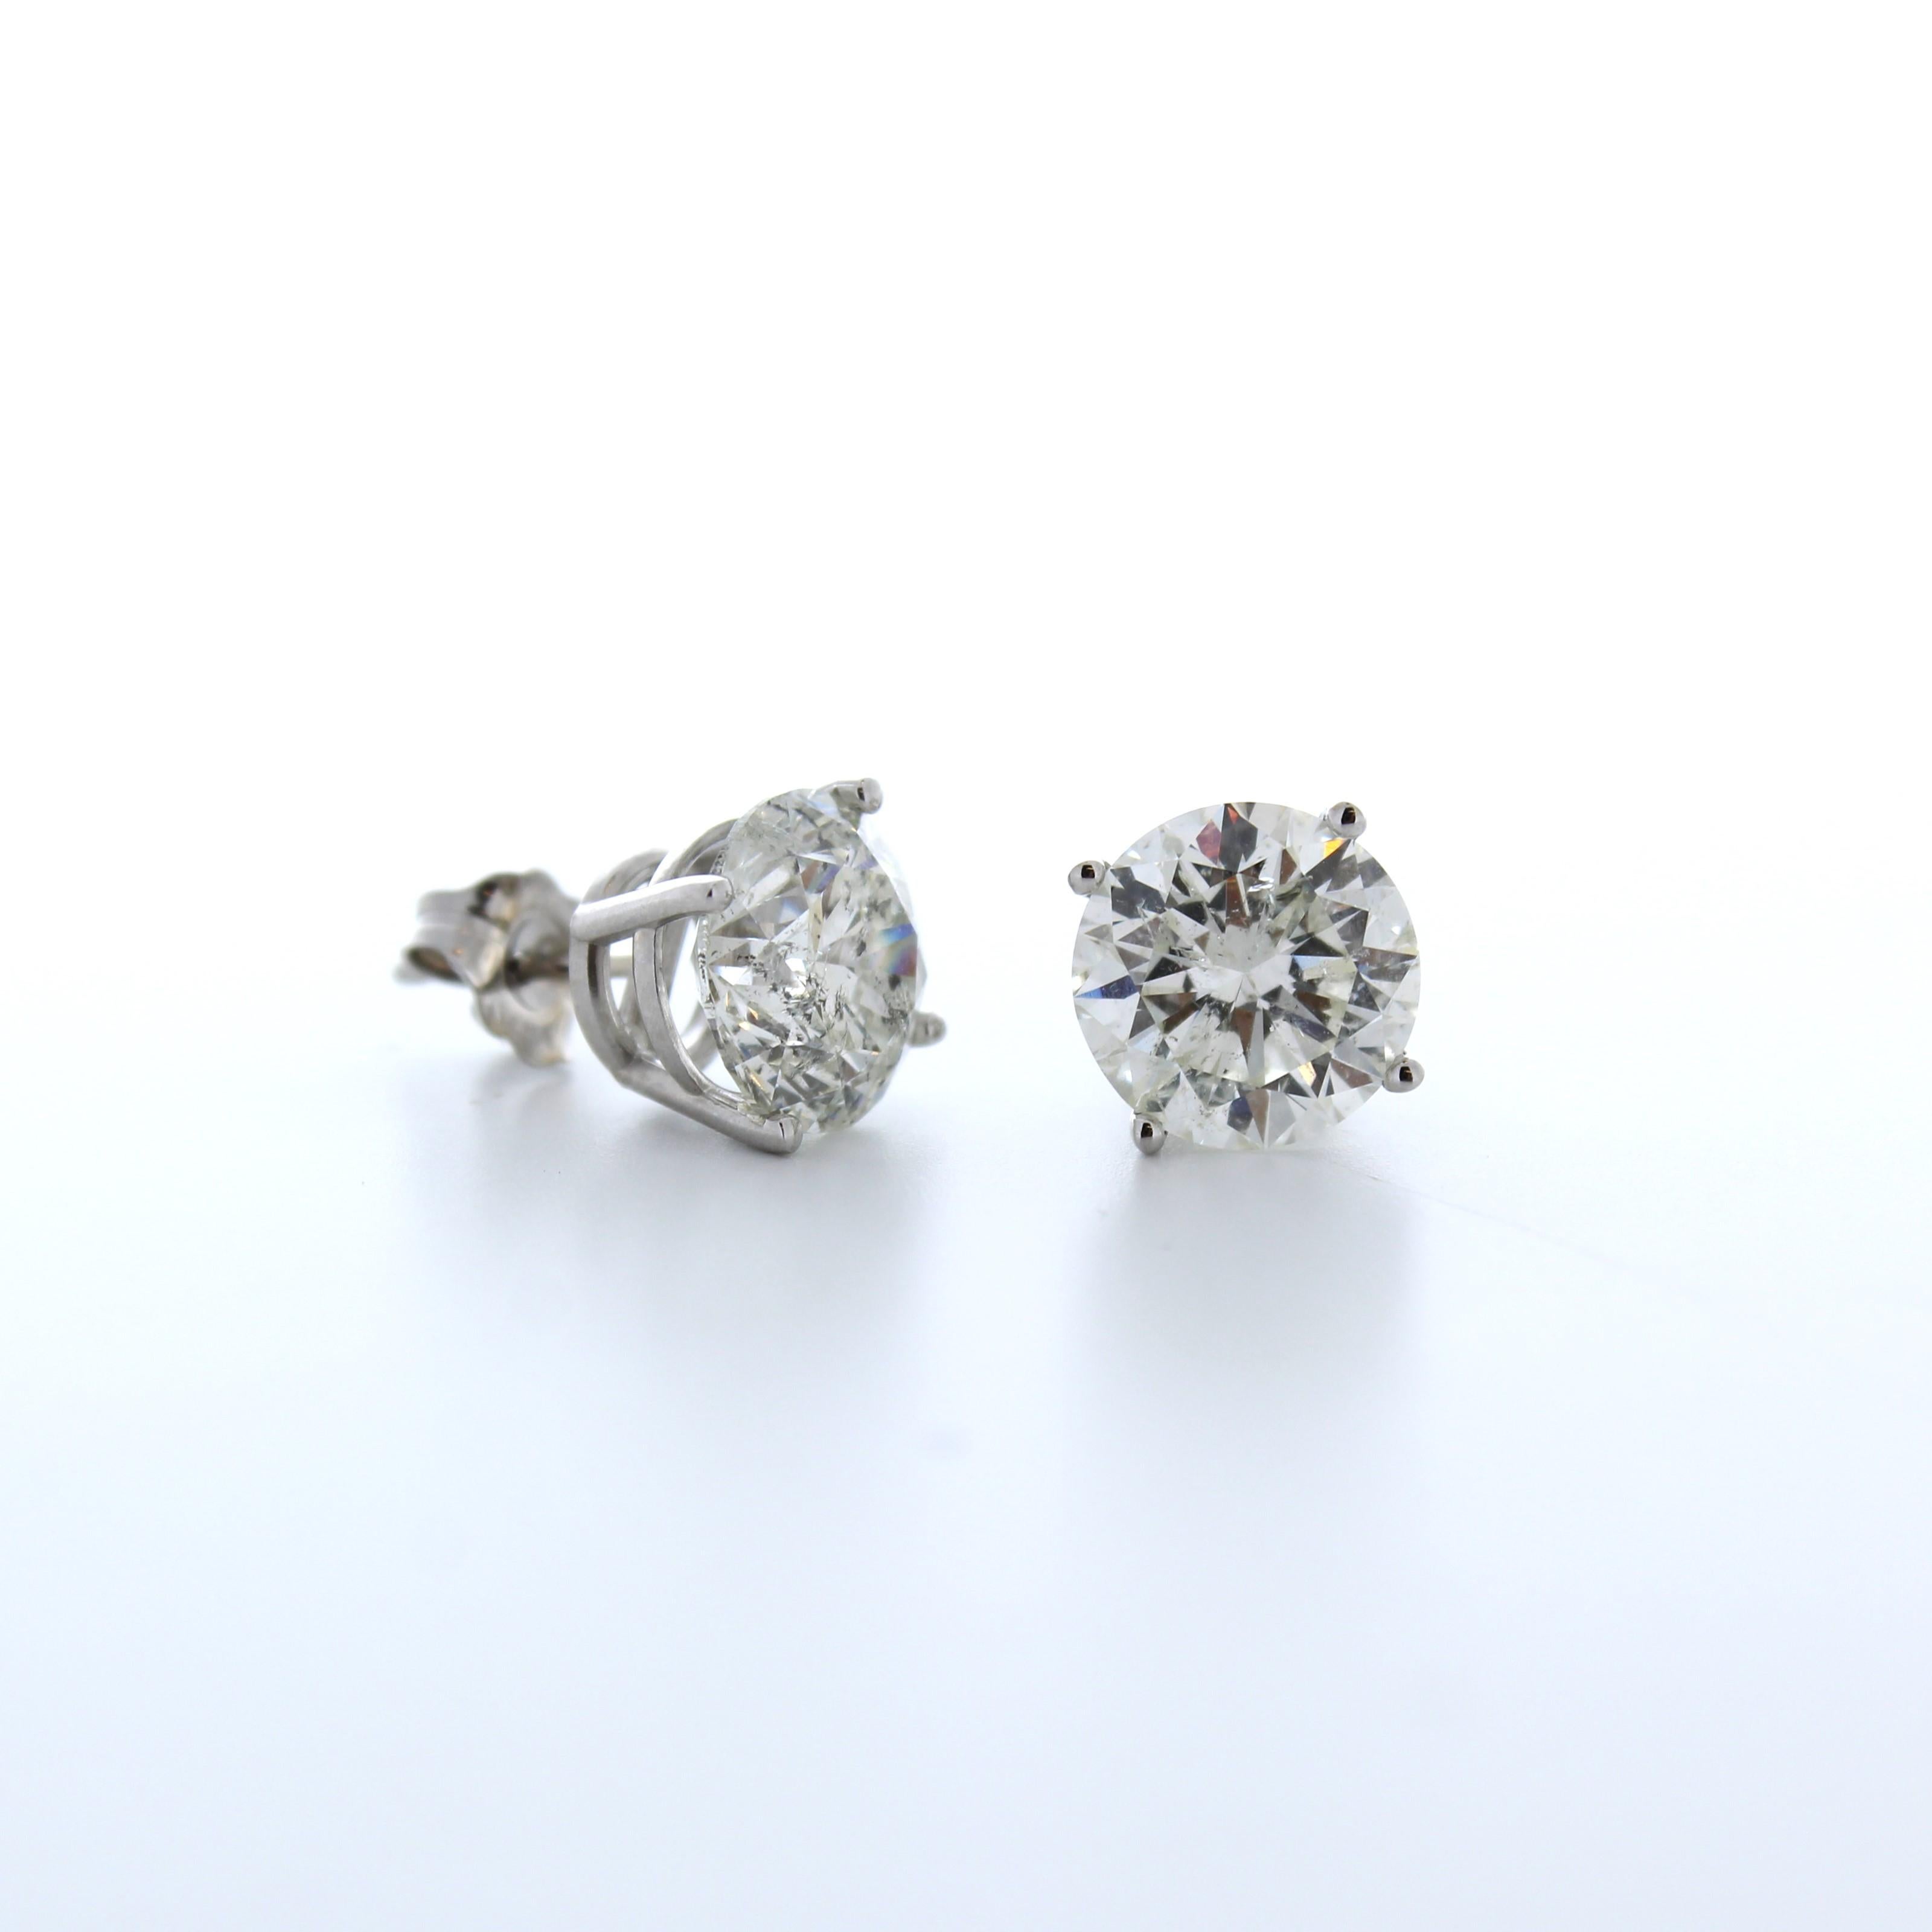 Introducing the pinnacle of elegance and luxury, these 6.03 Total Carat Weight EGL Certified Round Diamond Studs in 14k White Gold are the epitome of sophistication. Each stud showcases a mesmerizing round diamond with a captivating H-I color grade,